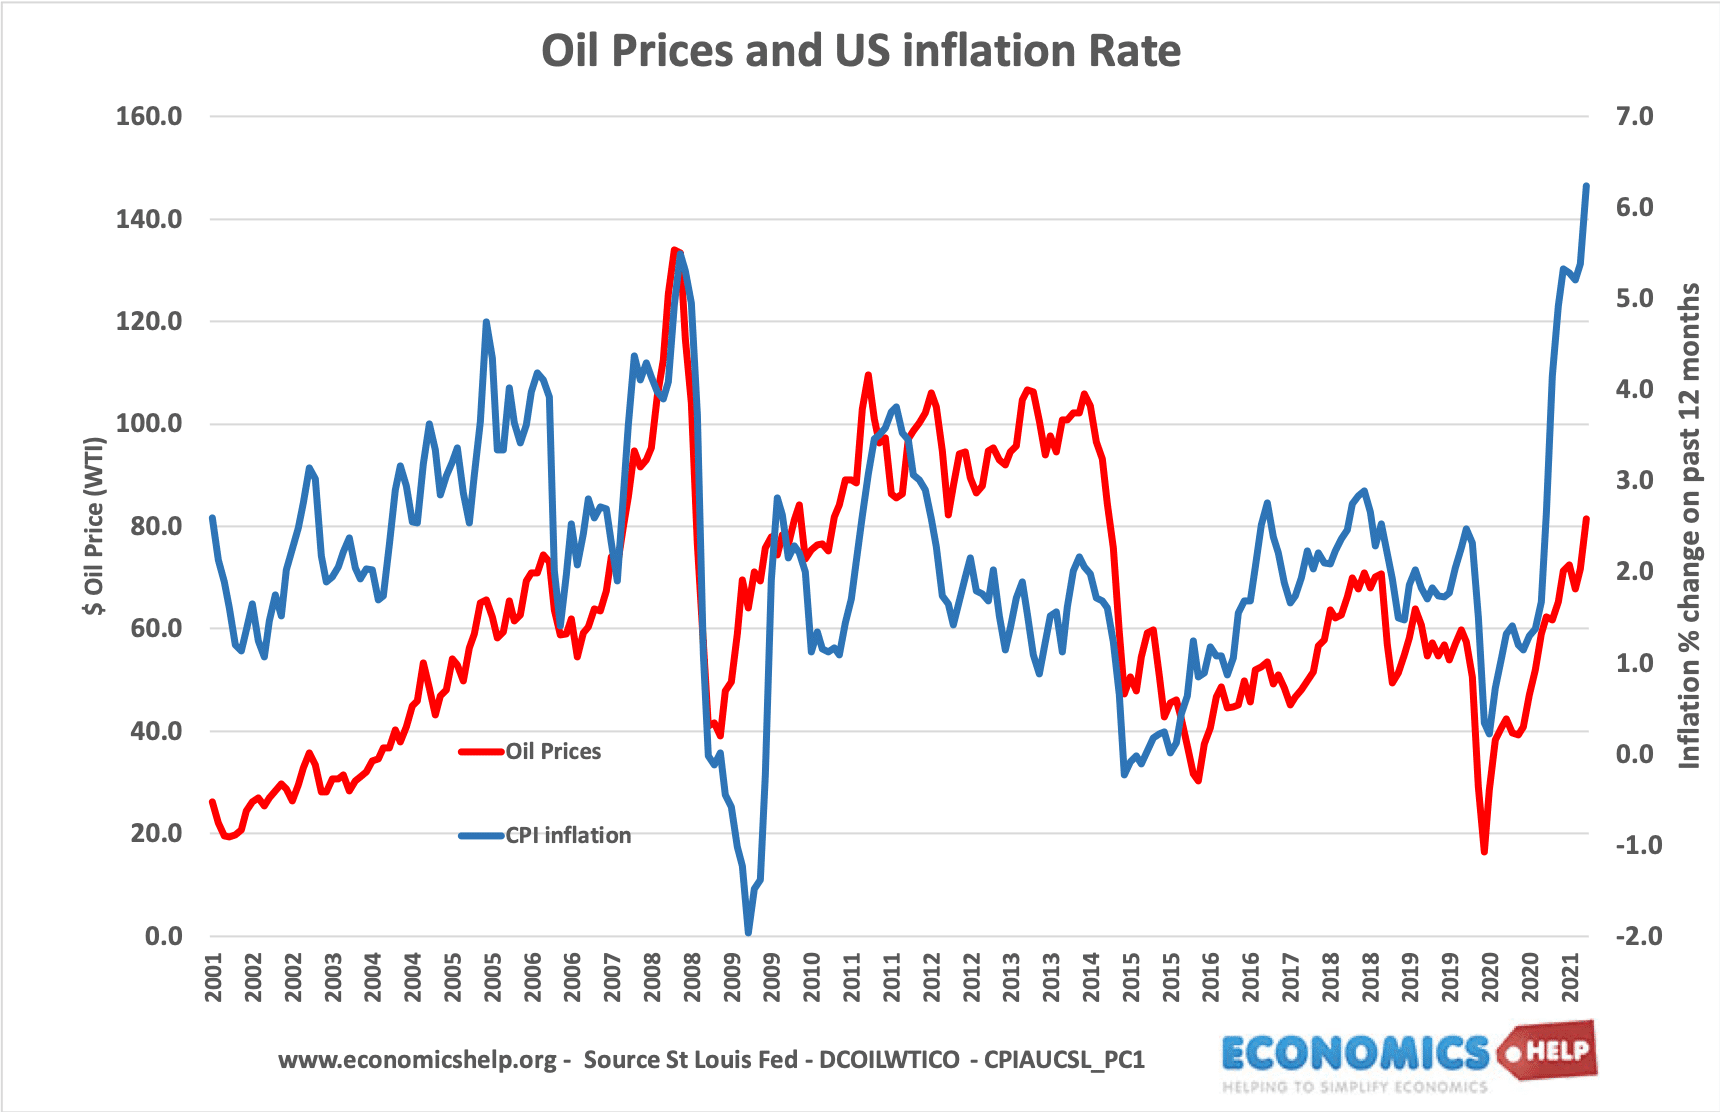 oil-prices-us-cpi-inflation-2001-2021